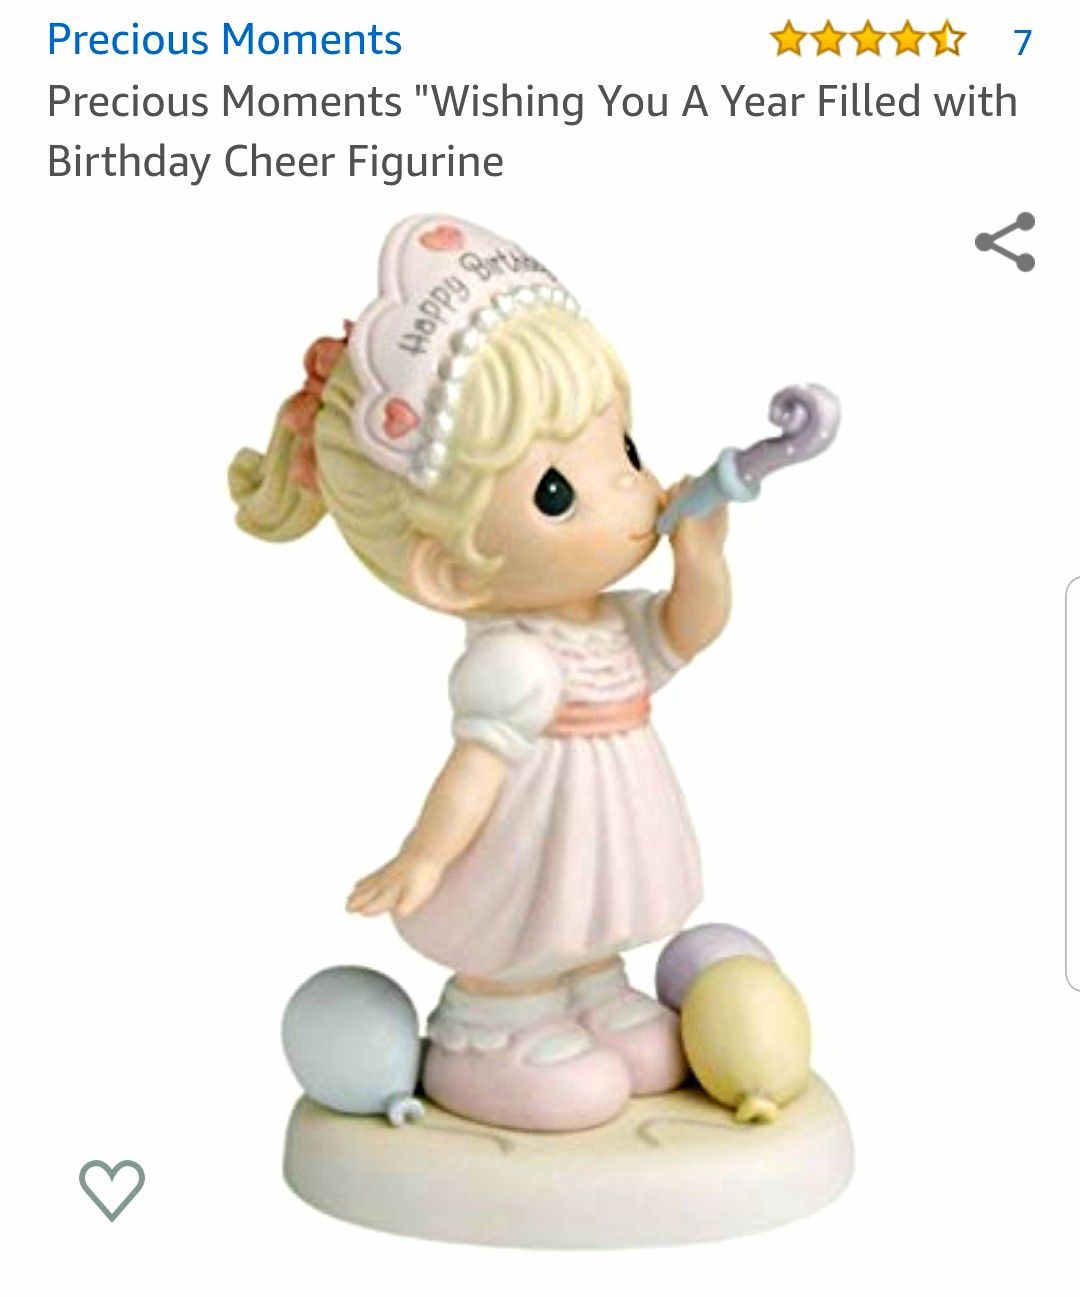 Precious Moments "Wishing You A Year Filled with Birthday Cheer Figurine " Collectible